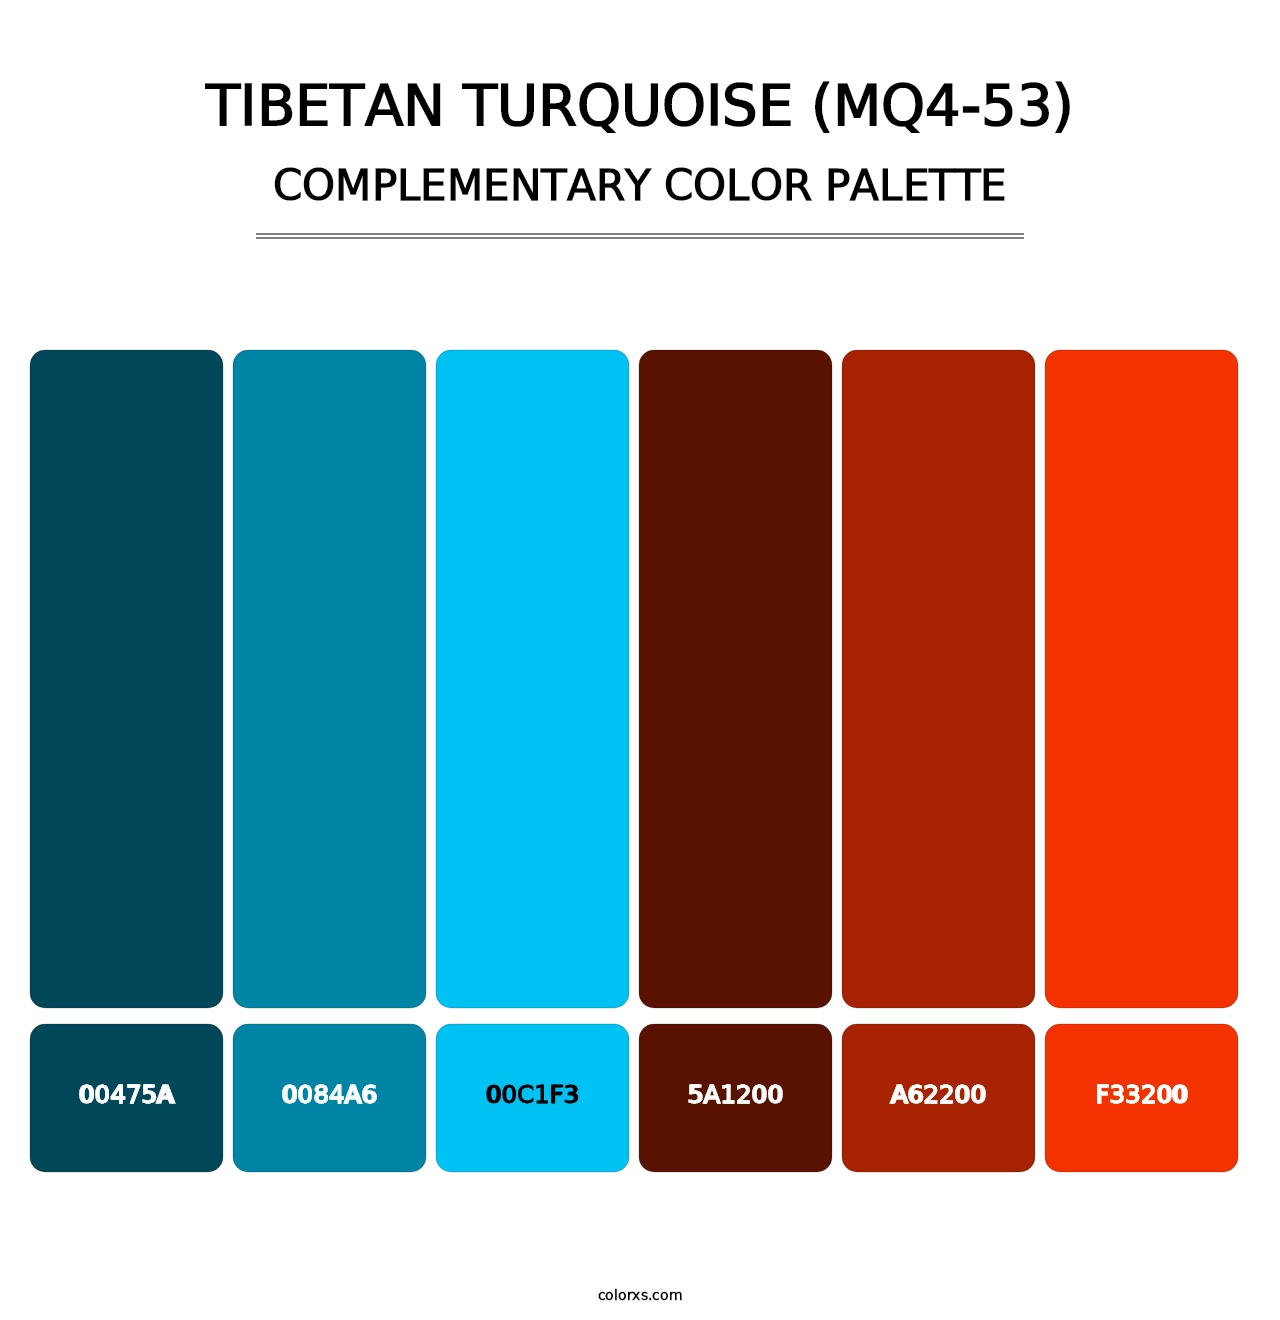 Tibetan Turquoise (MQ4-53) - Complementary Color Palette